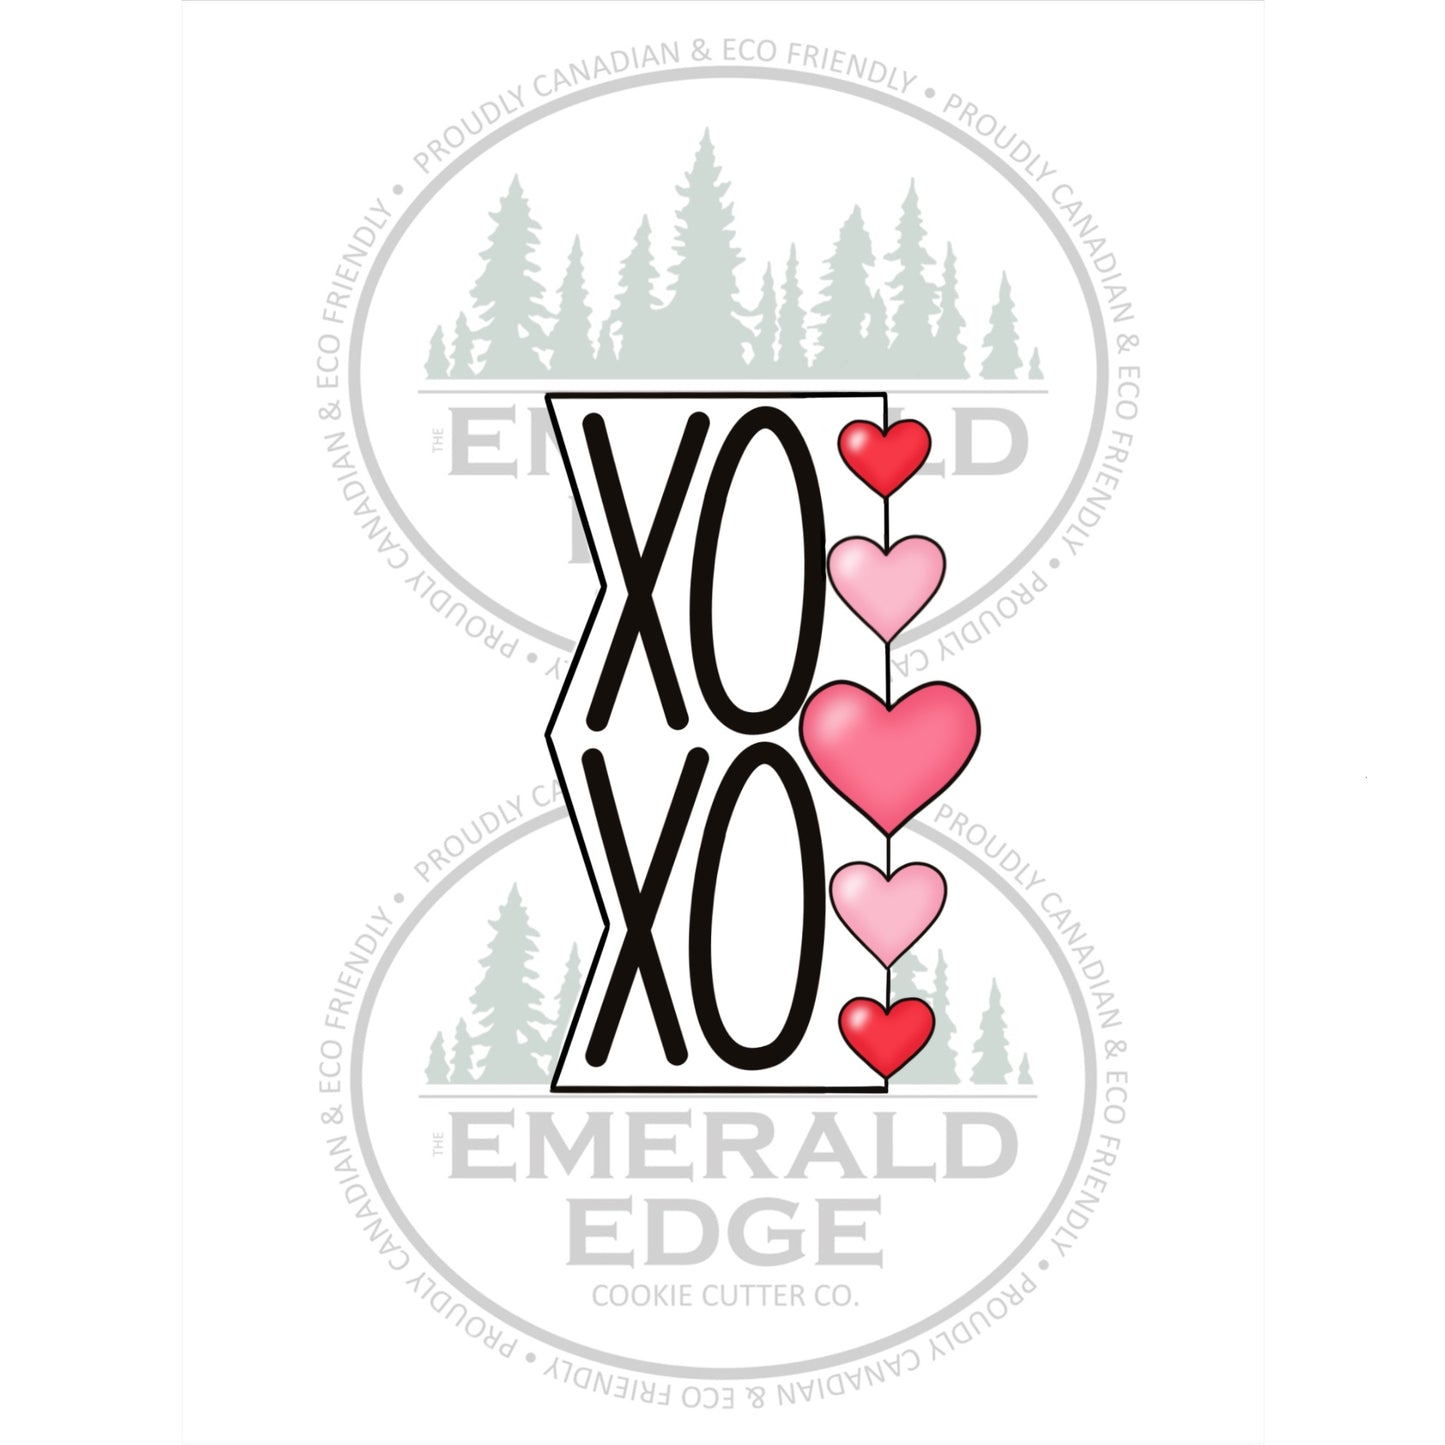 Xoxo Stack with Hearts